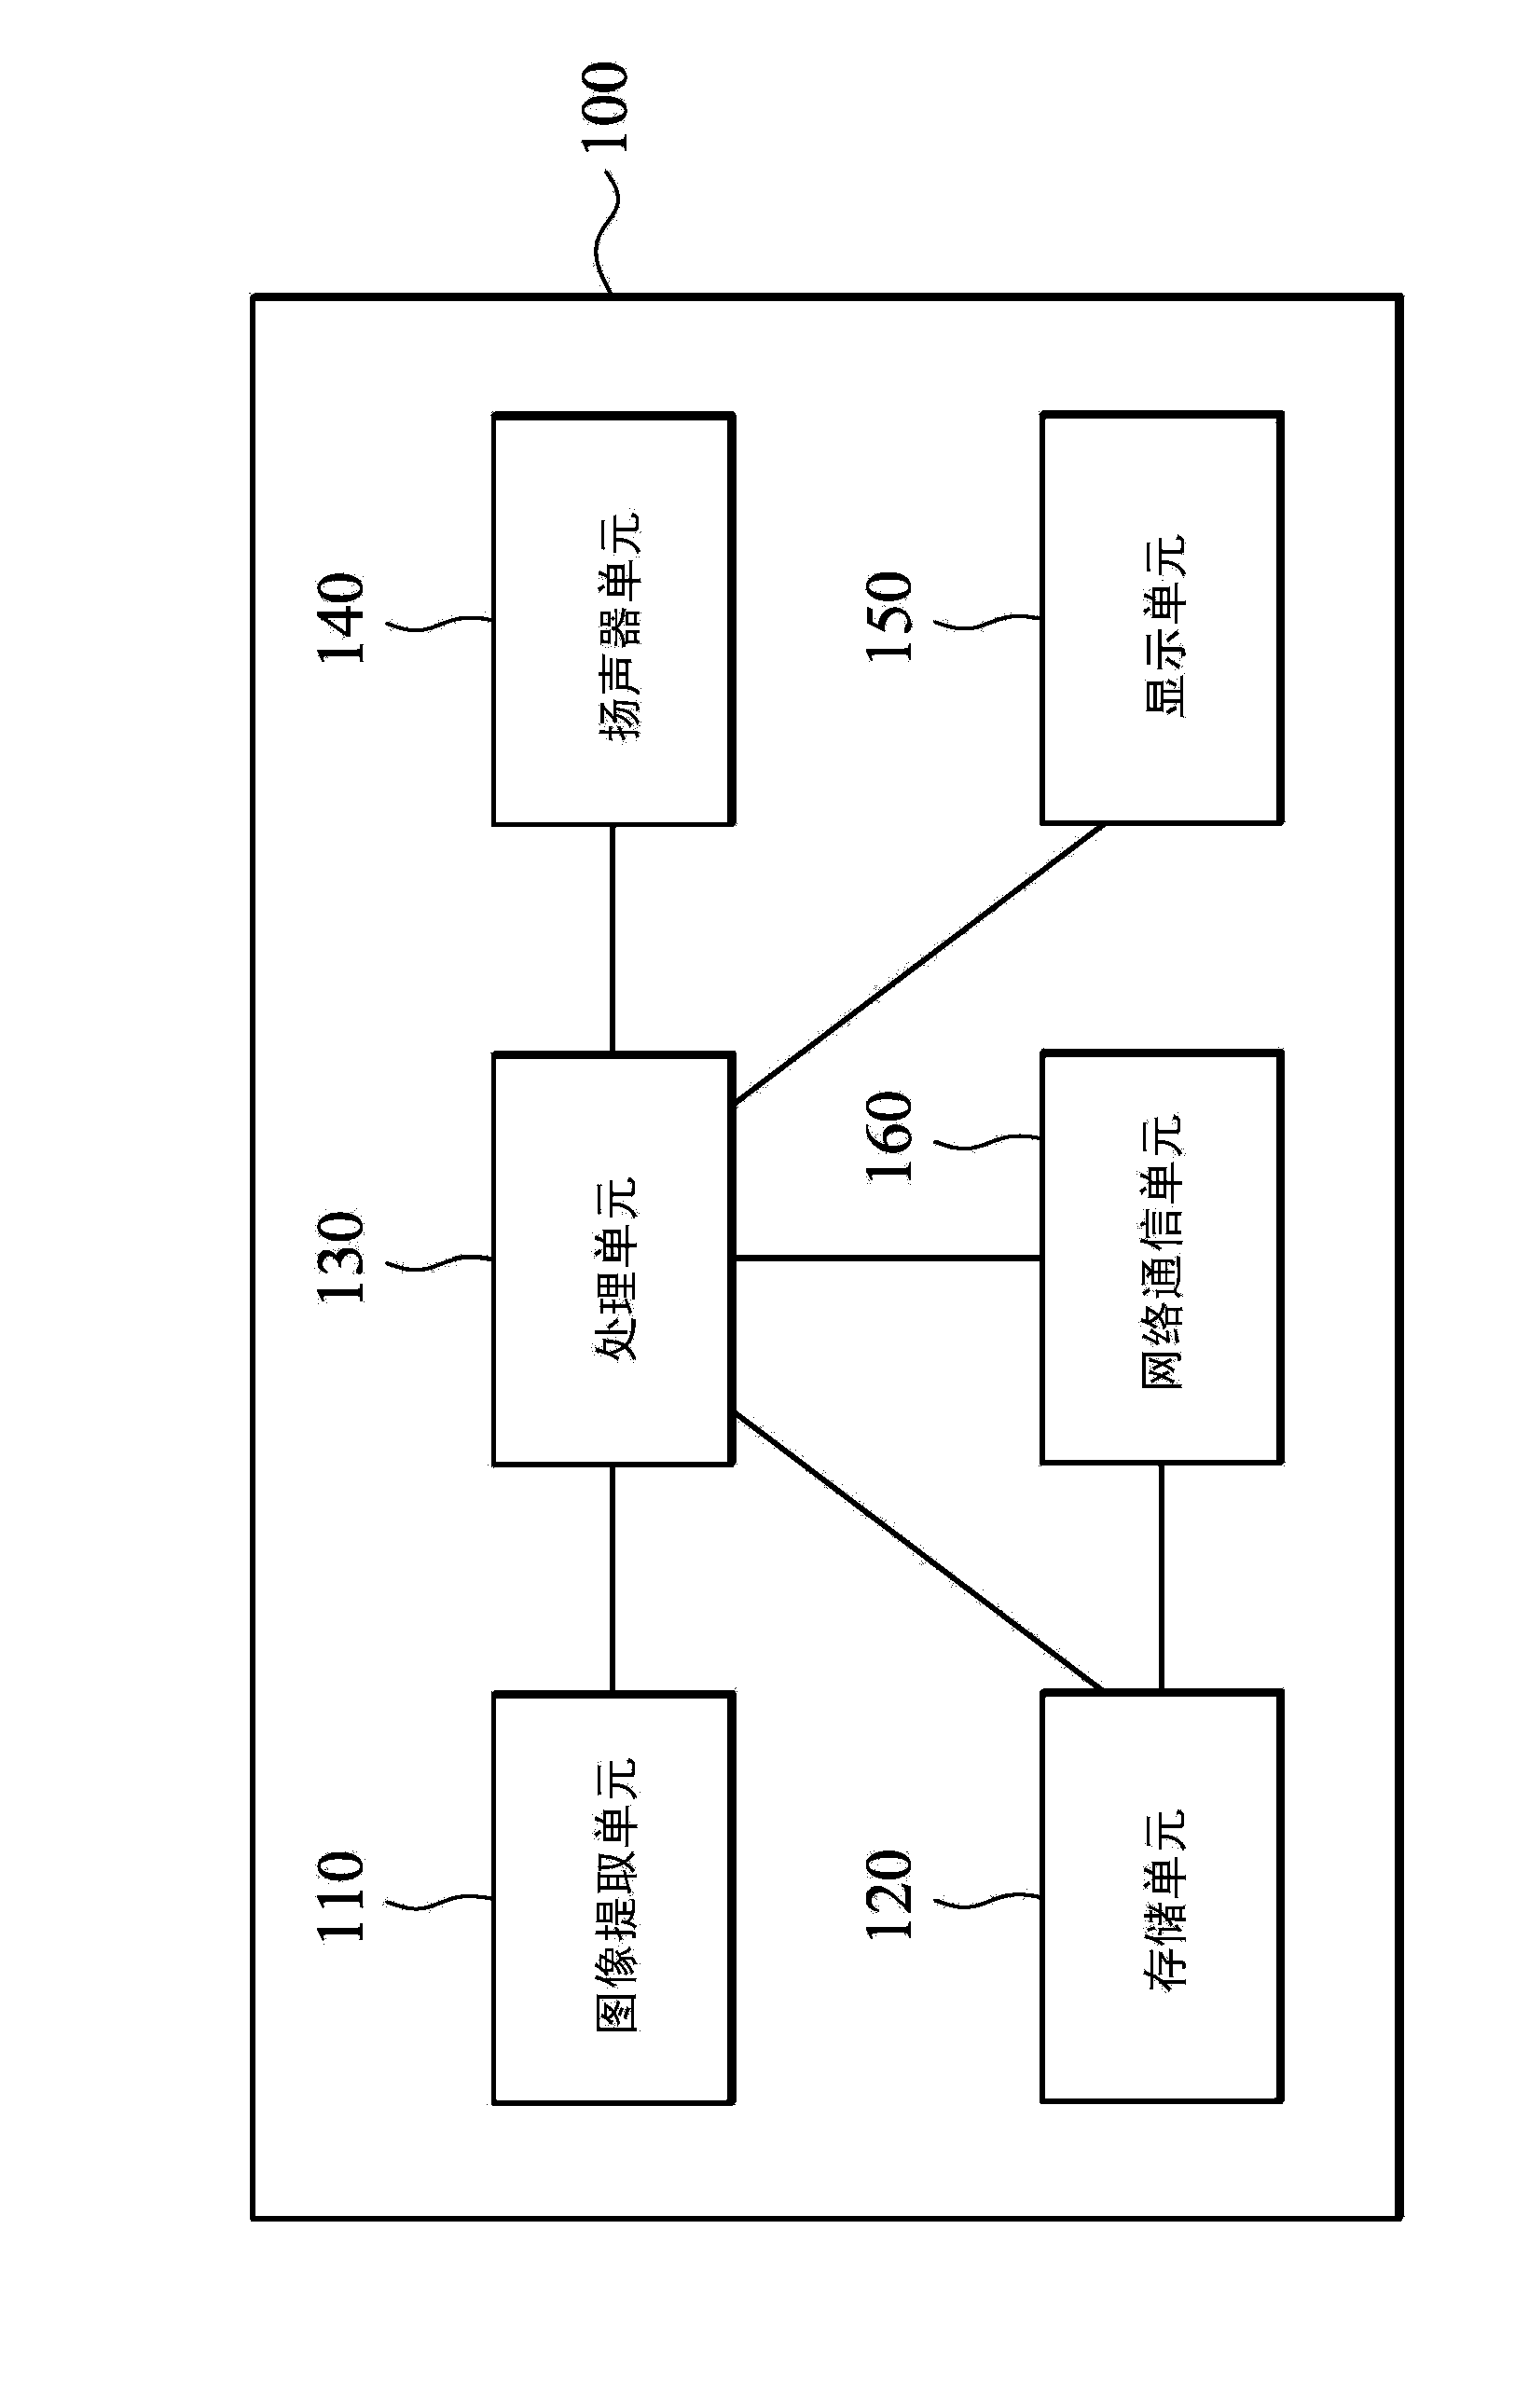 Audio-video playing device and method